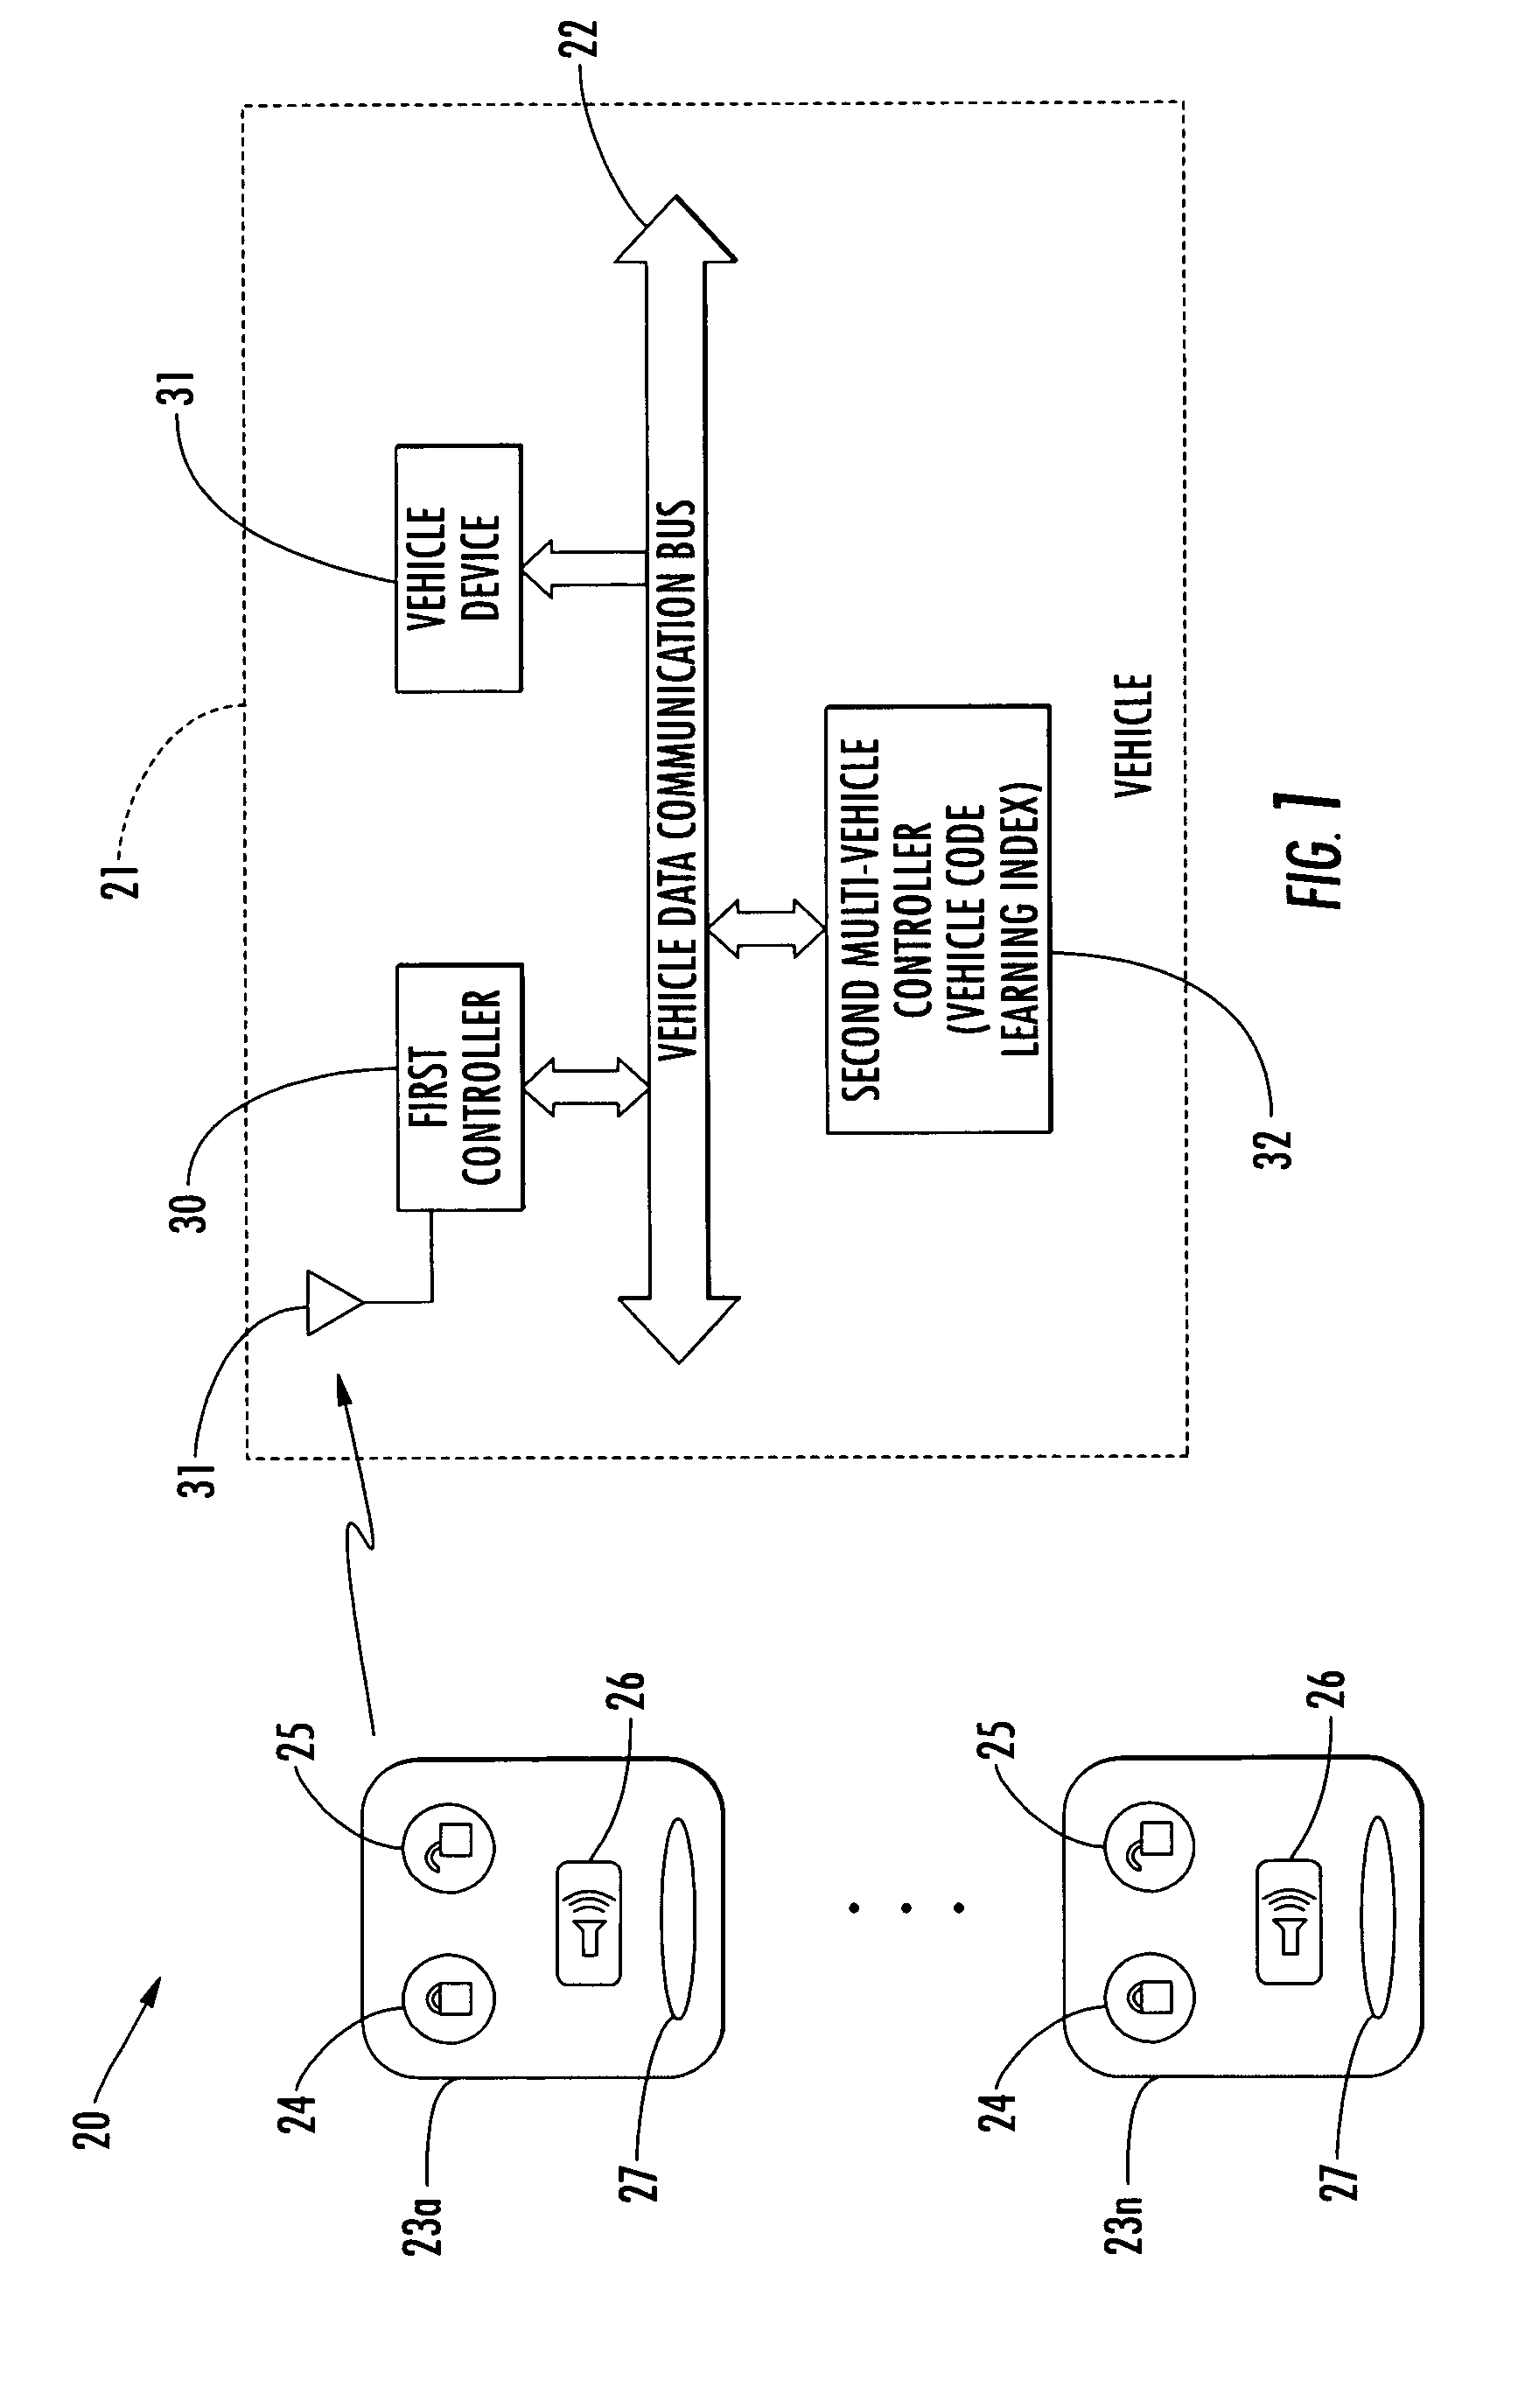 Vehicle control system including multi-vehicle controller using vehicle code learning index and related methods